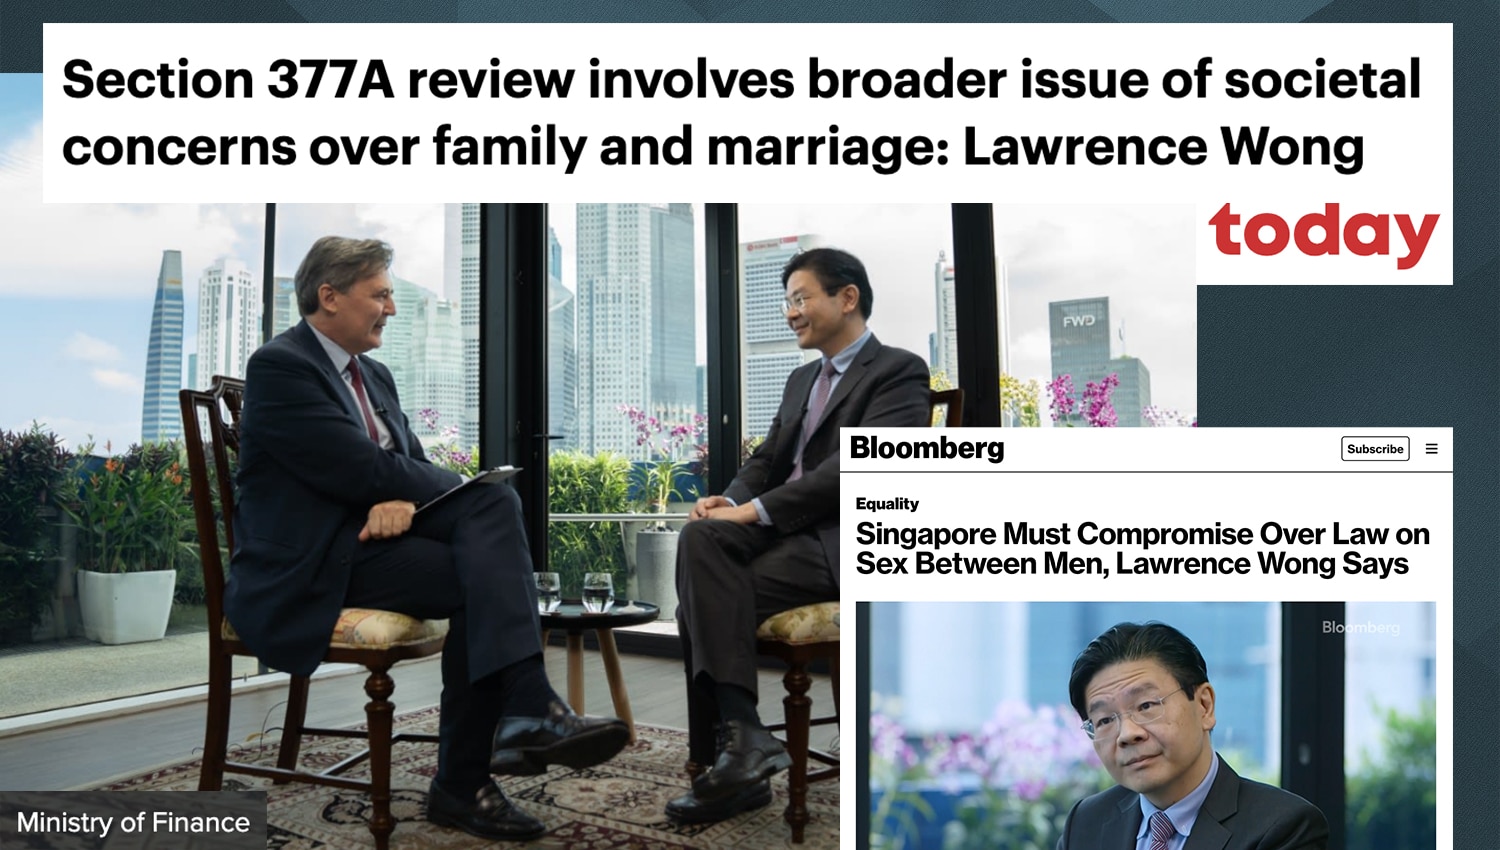 Singapore Deputy Prime Minister Lawrence Wong in an interview with Mr John Micklethwait, Bloomberg News Editor-in-Chief, on 15 Aug, 2022.